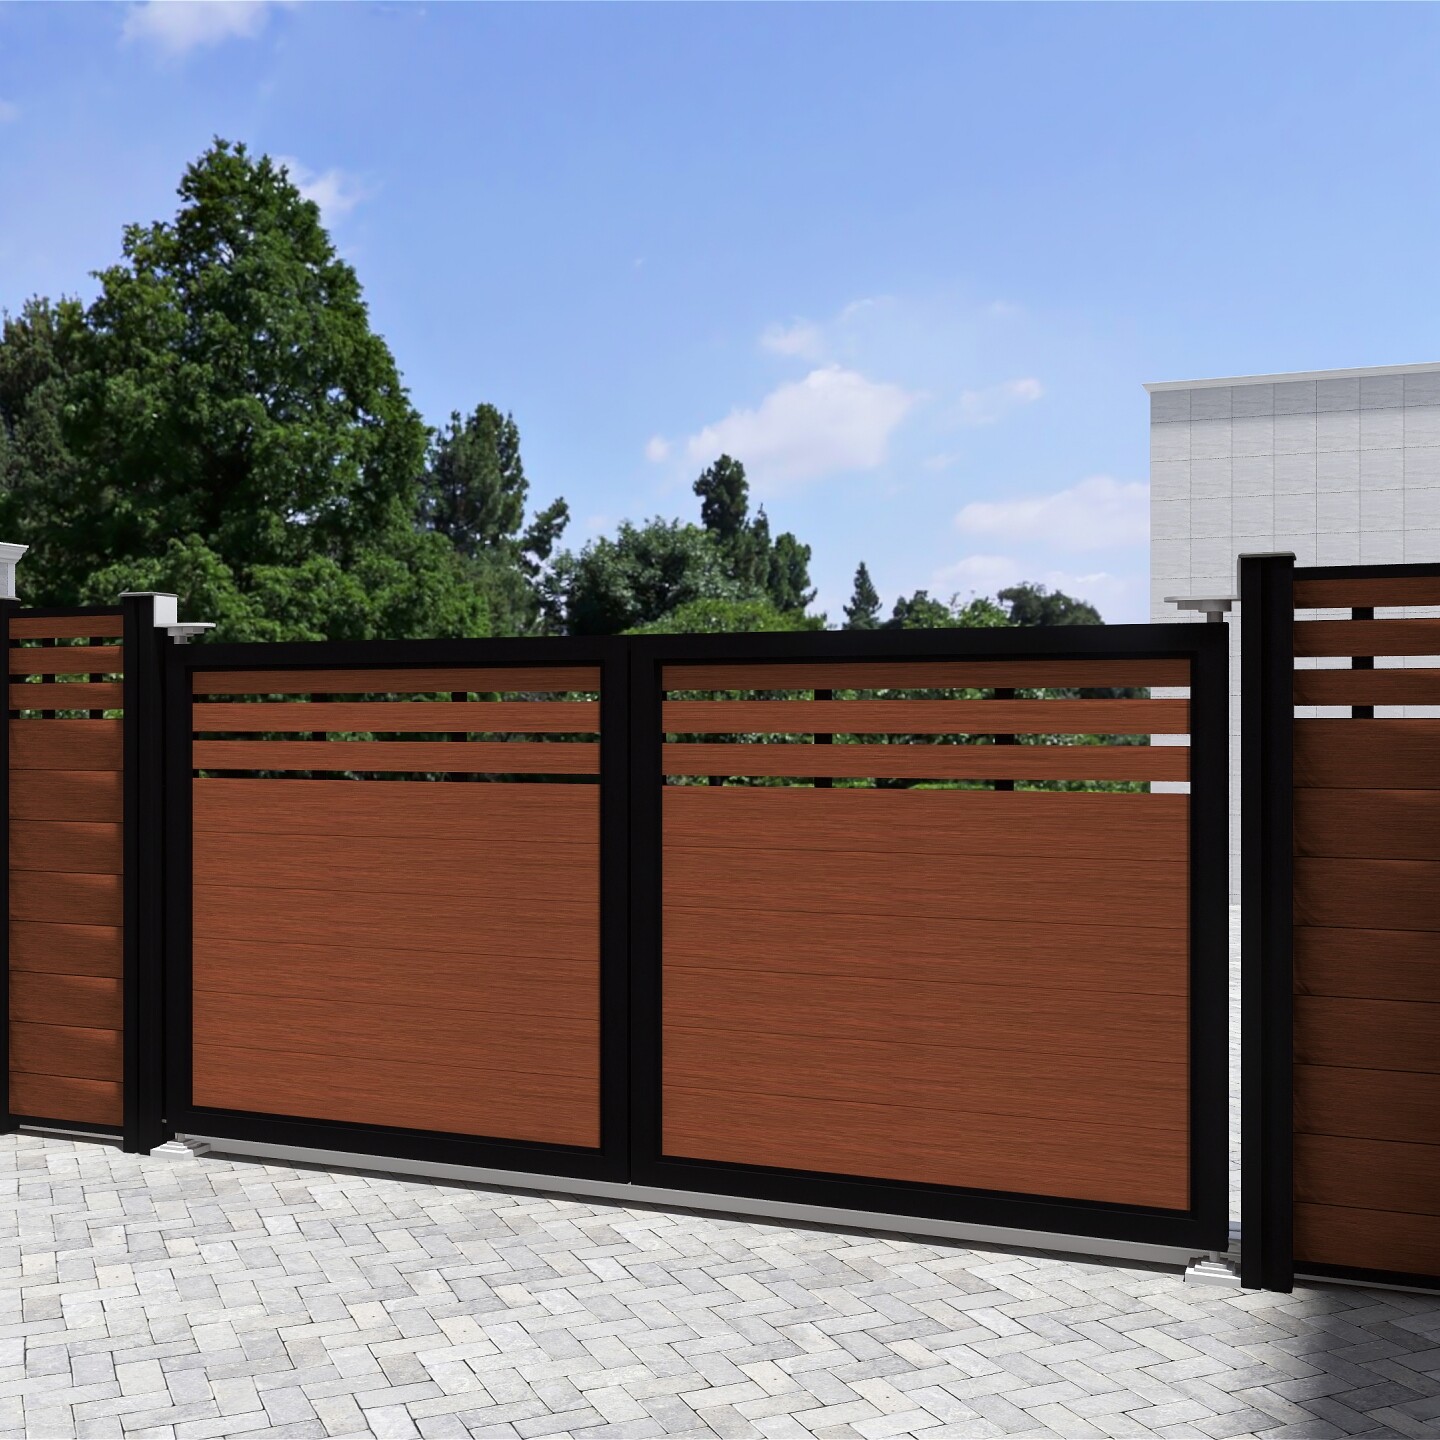 electrical swing gate company, electrical swing gate exporter, electric fence swing gate, electric swing driveway gates, electric swing gate kit